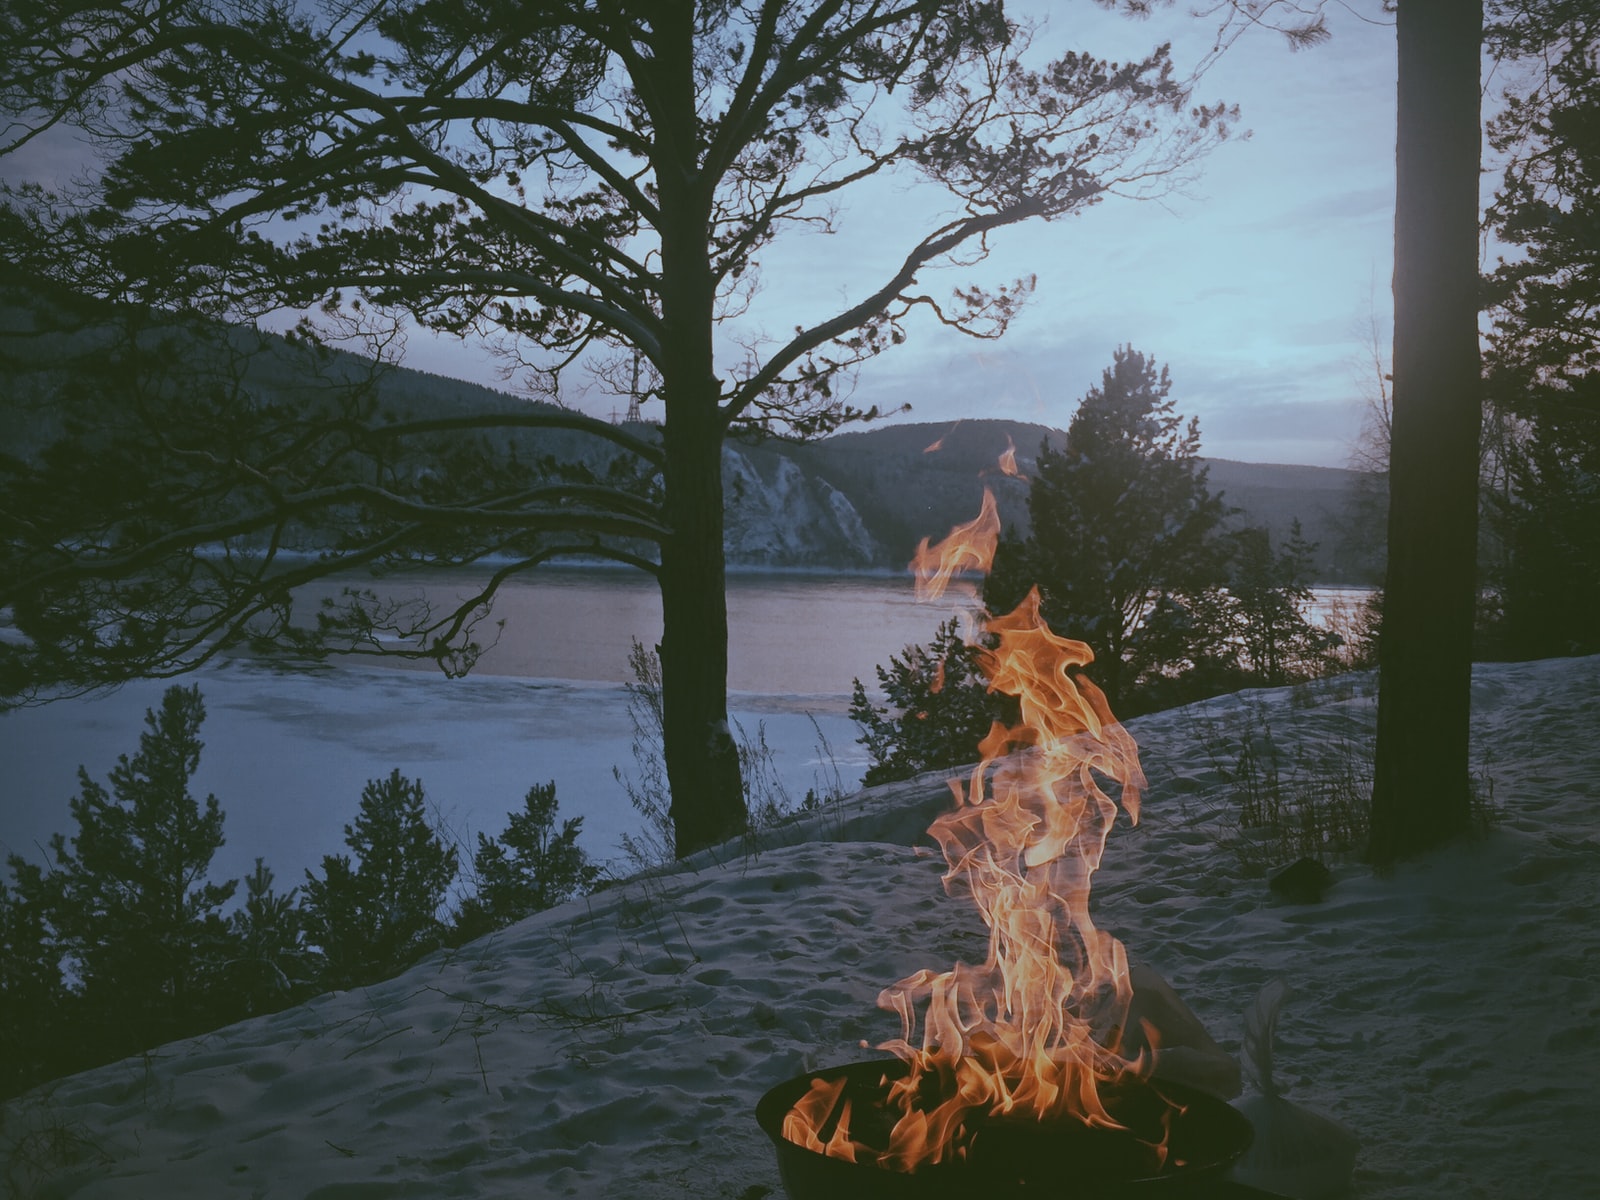 fire pit near body of water and trees